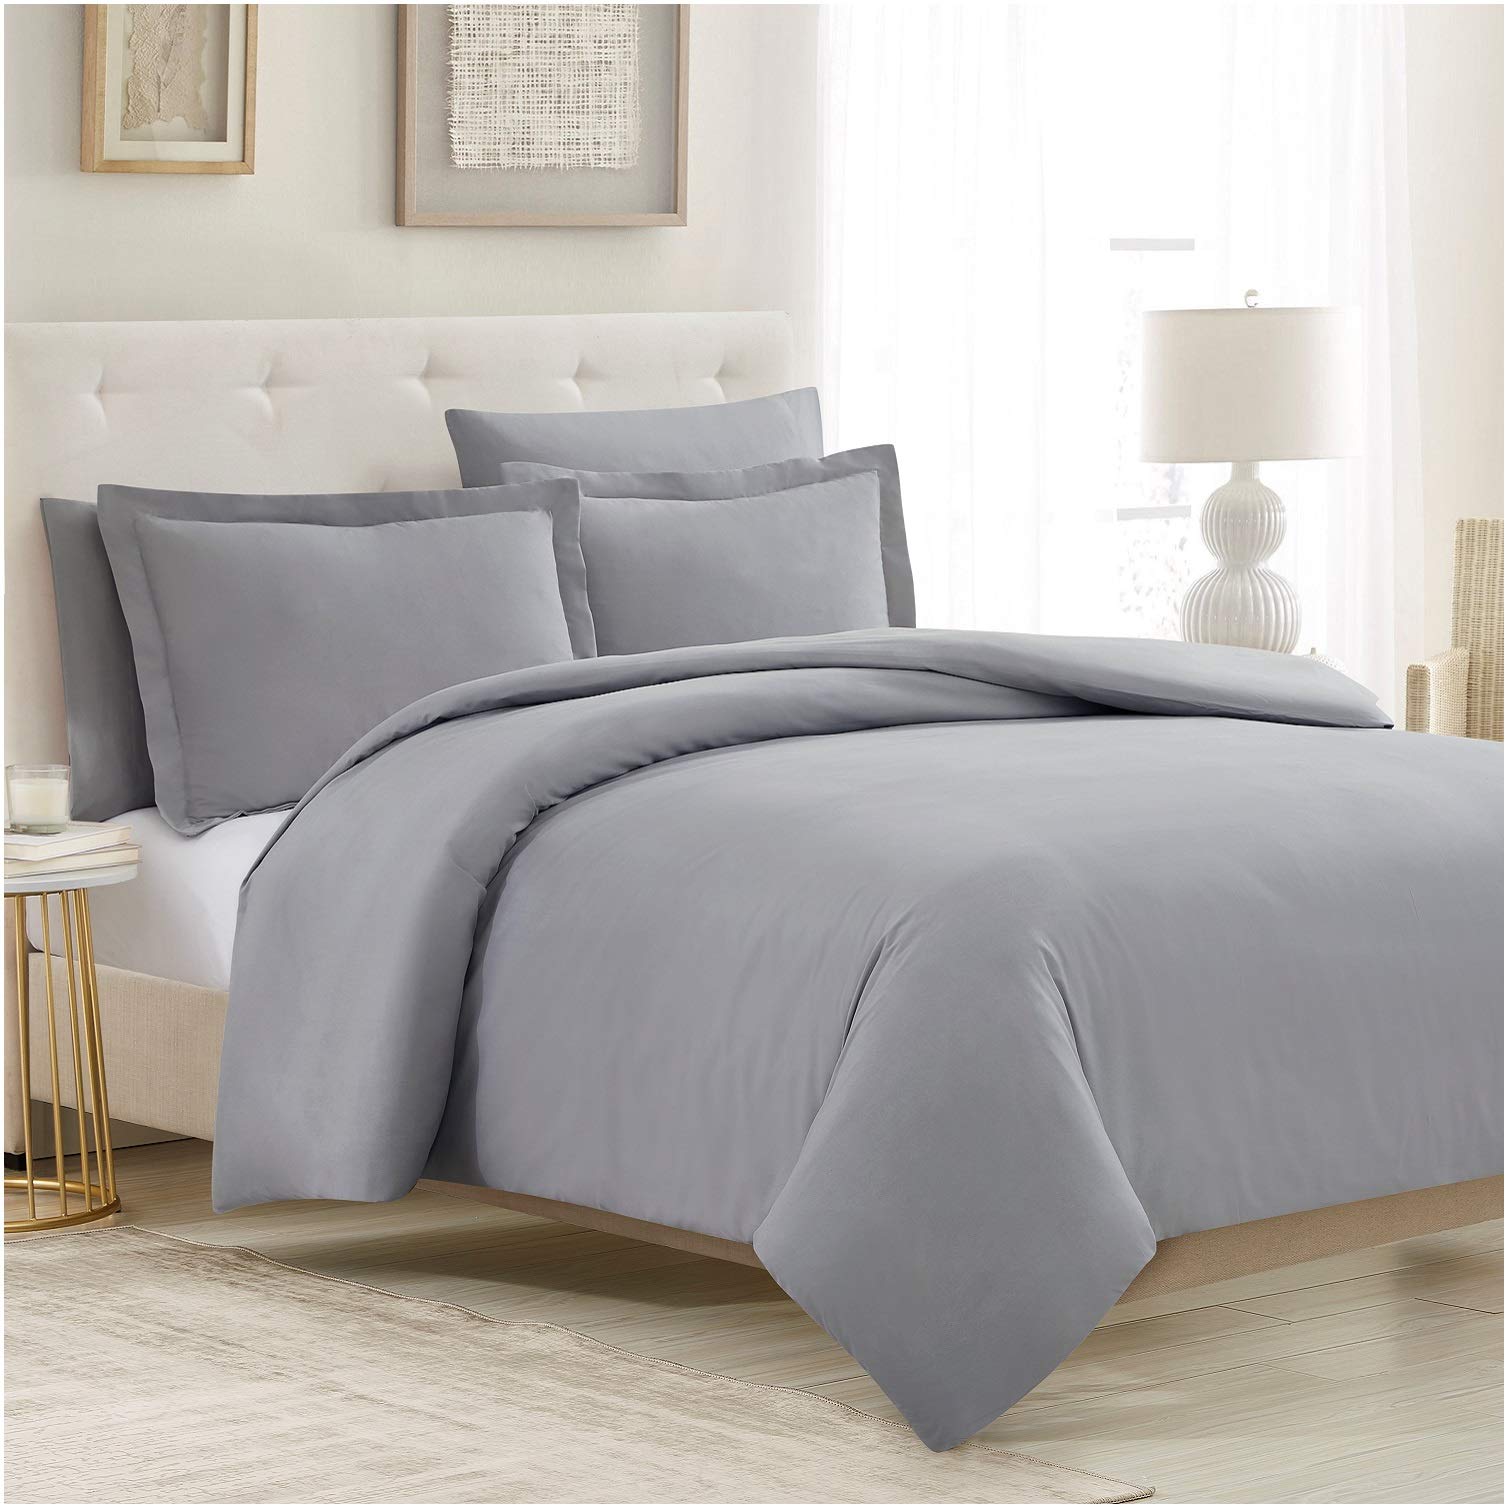 Book Cover Mellanni Duvet Cover Queen Size Set - 5 PC Iconic Collection Bedding Set - Luxury, Extra & Cooling - 1 Comforter Cover, 2 Shams, 2 Pillow Cases - Button Closure and Corner Ties (Queen, Light Gray) Queen Light Gray